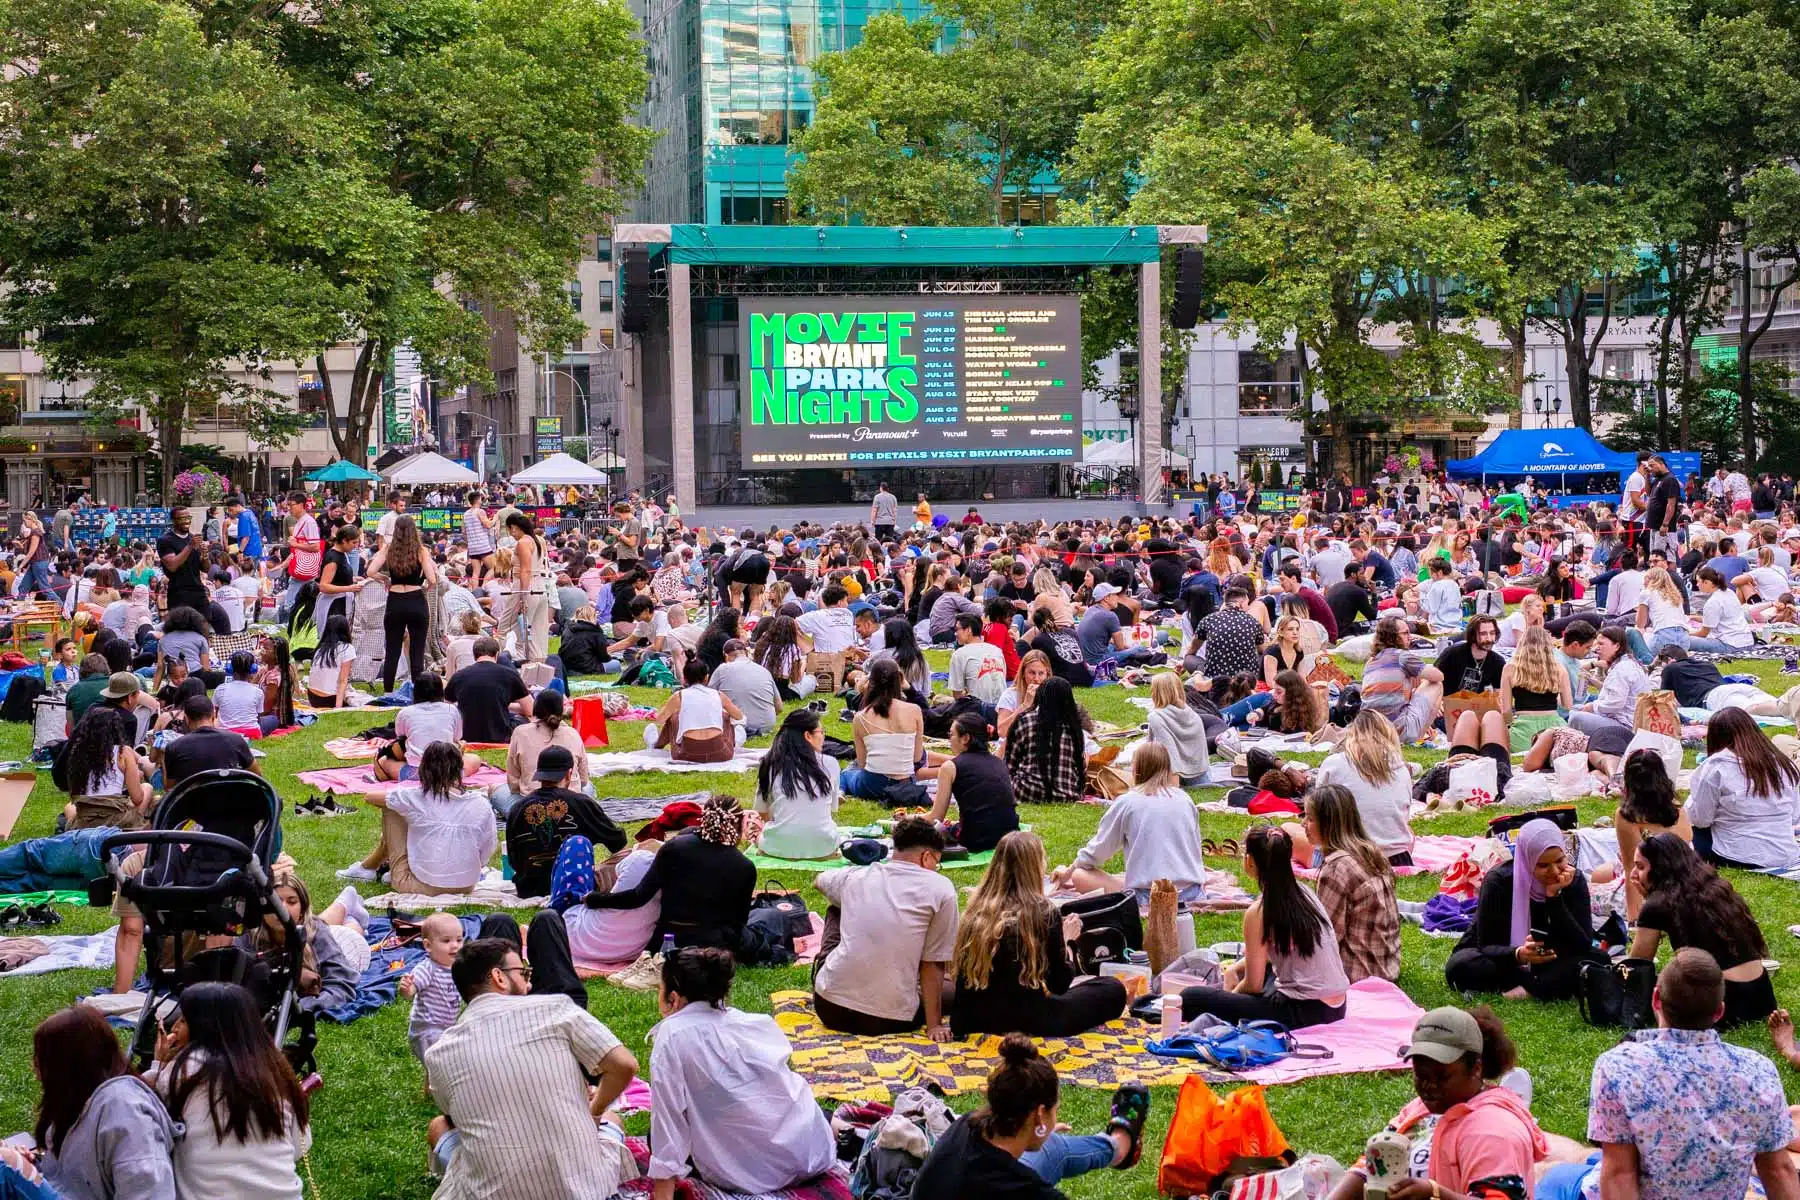 Where to see outdoor movies in New York City